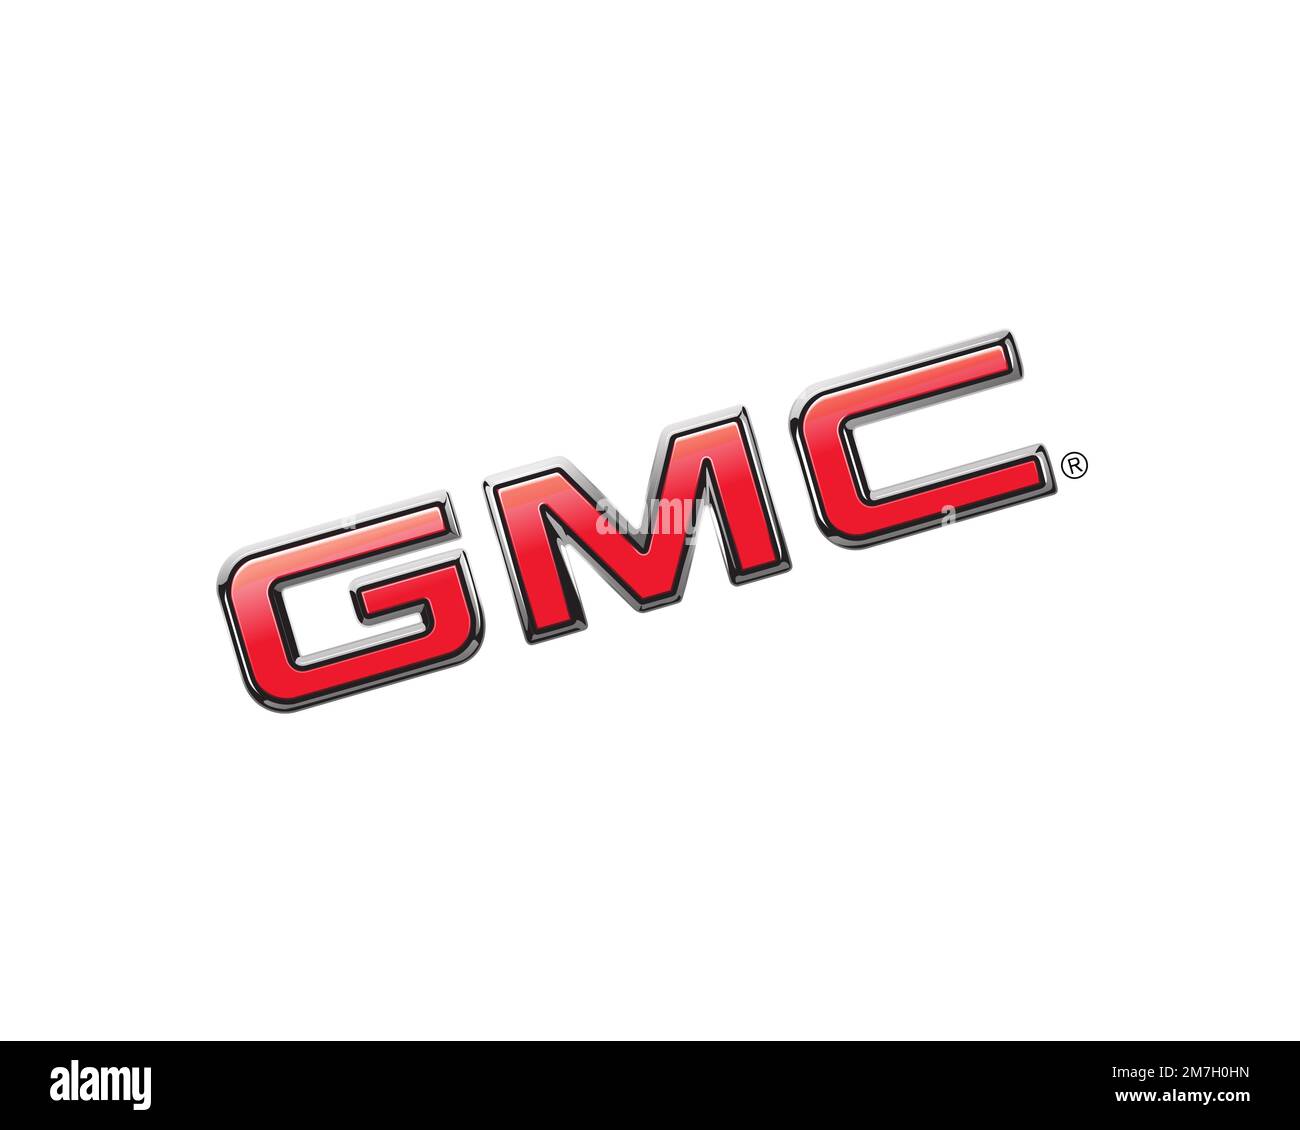 Gmc Cut Out Stock Images & Pictures - Alamy